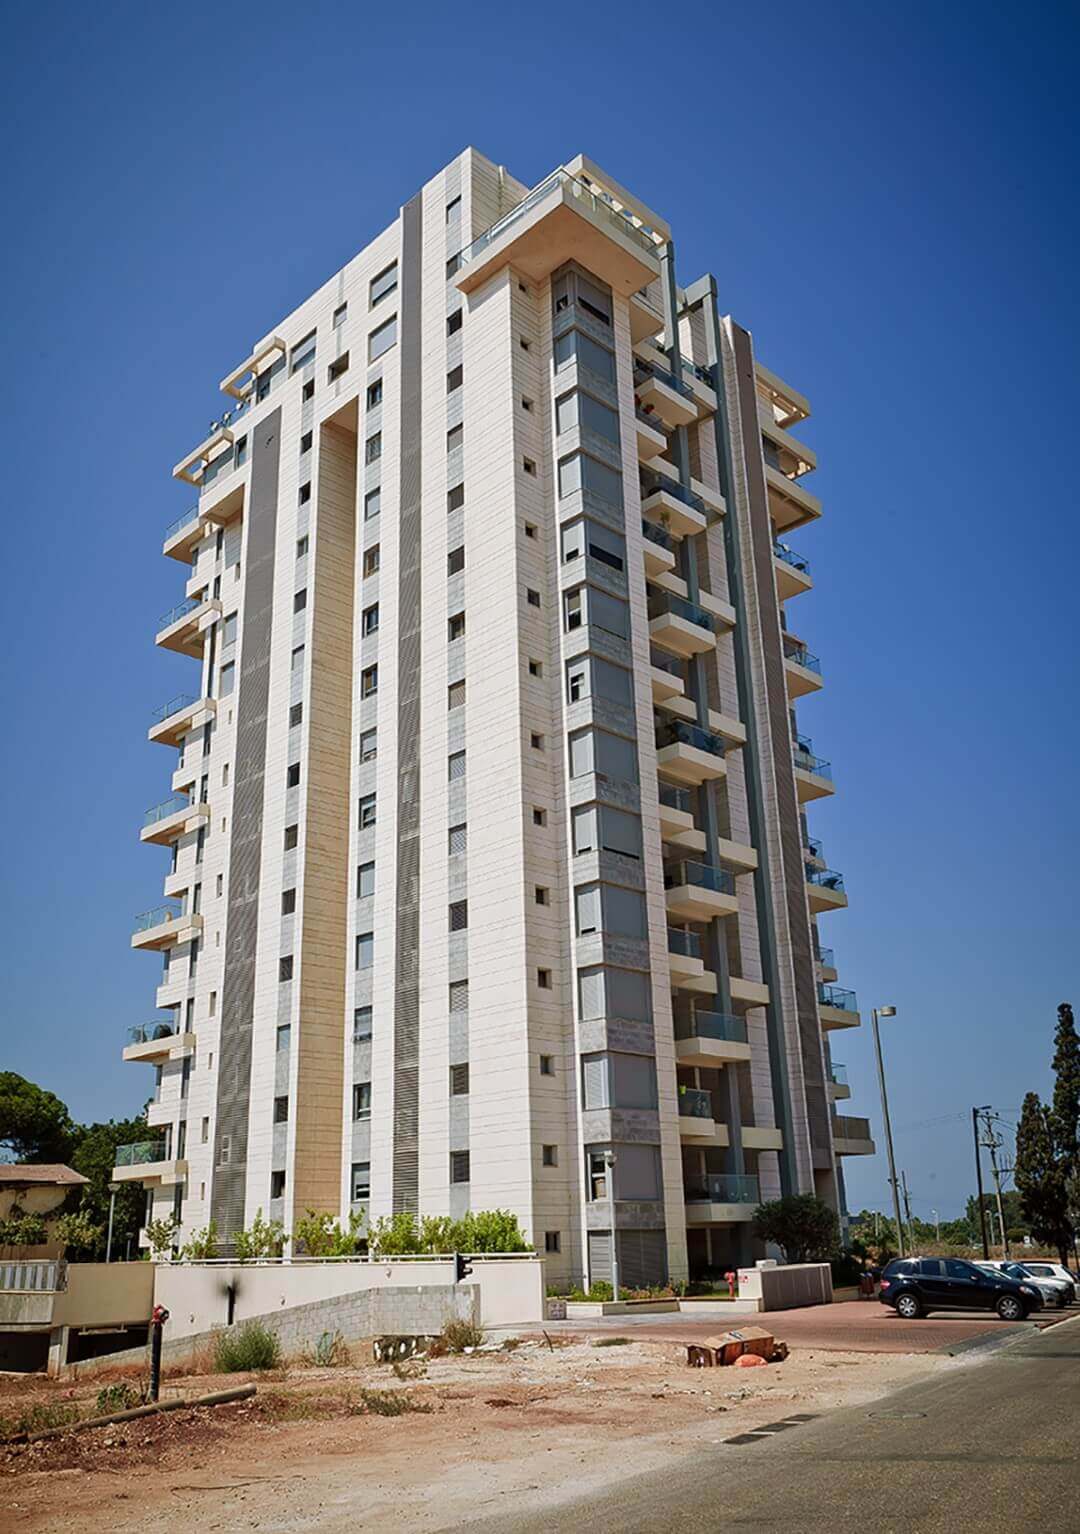 Photograph of a building from the Aviv project in Alterman - the tower in Herzliya